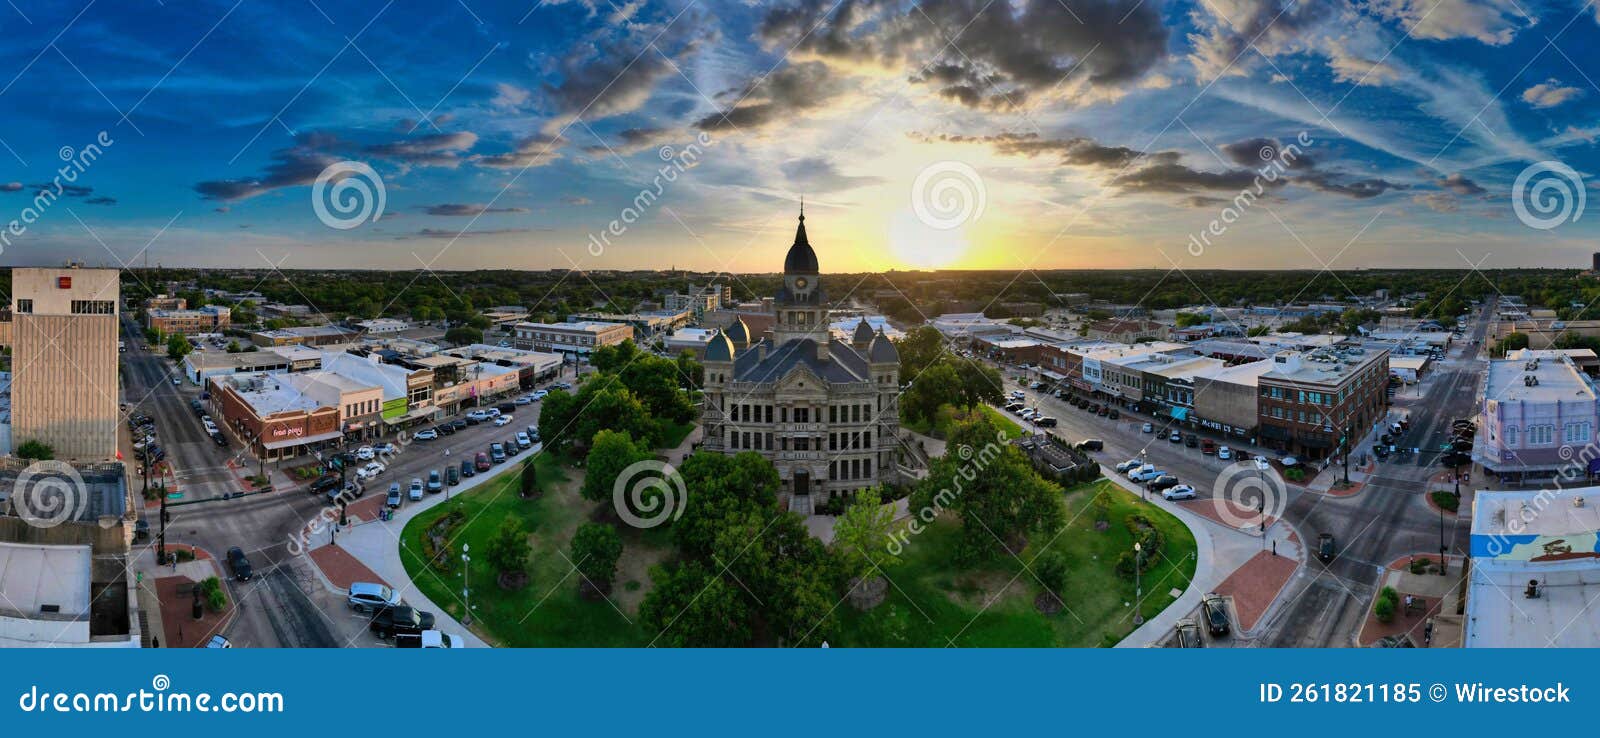 aerial panoramic of the denton county courthouse museum around the streets and buildings in texas